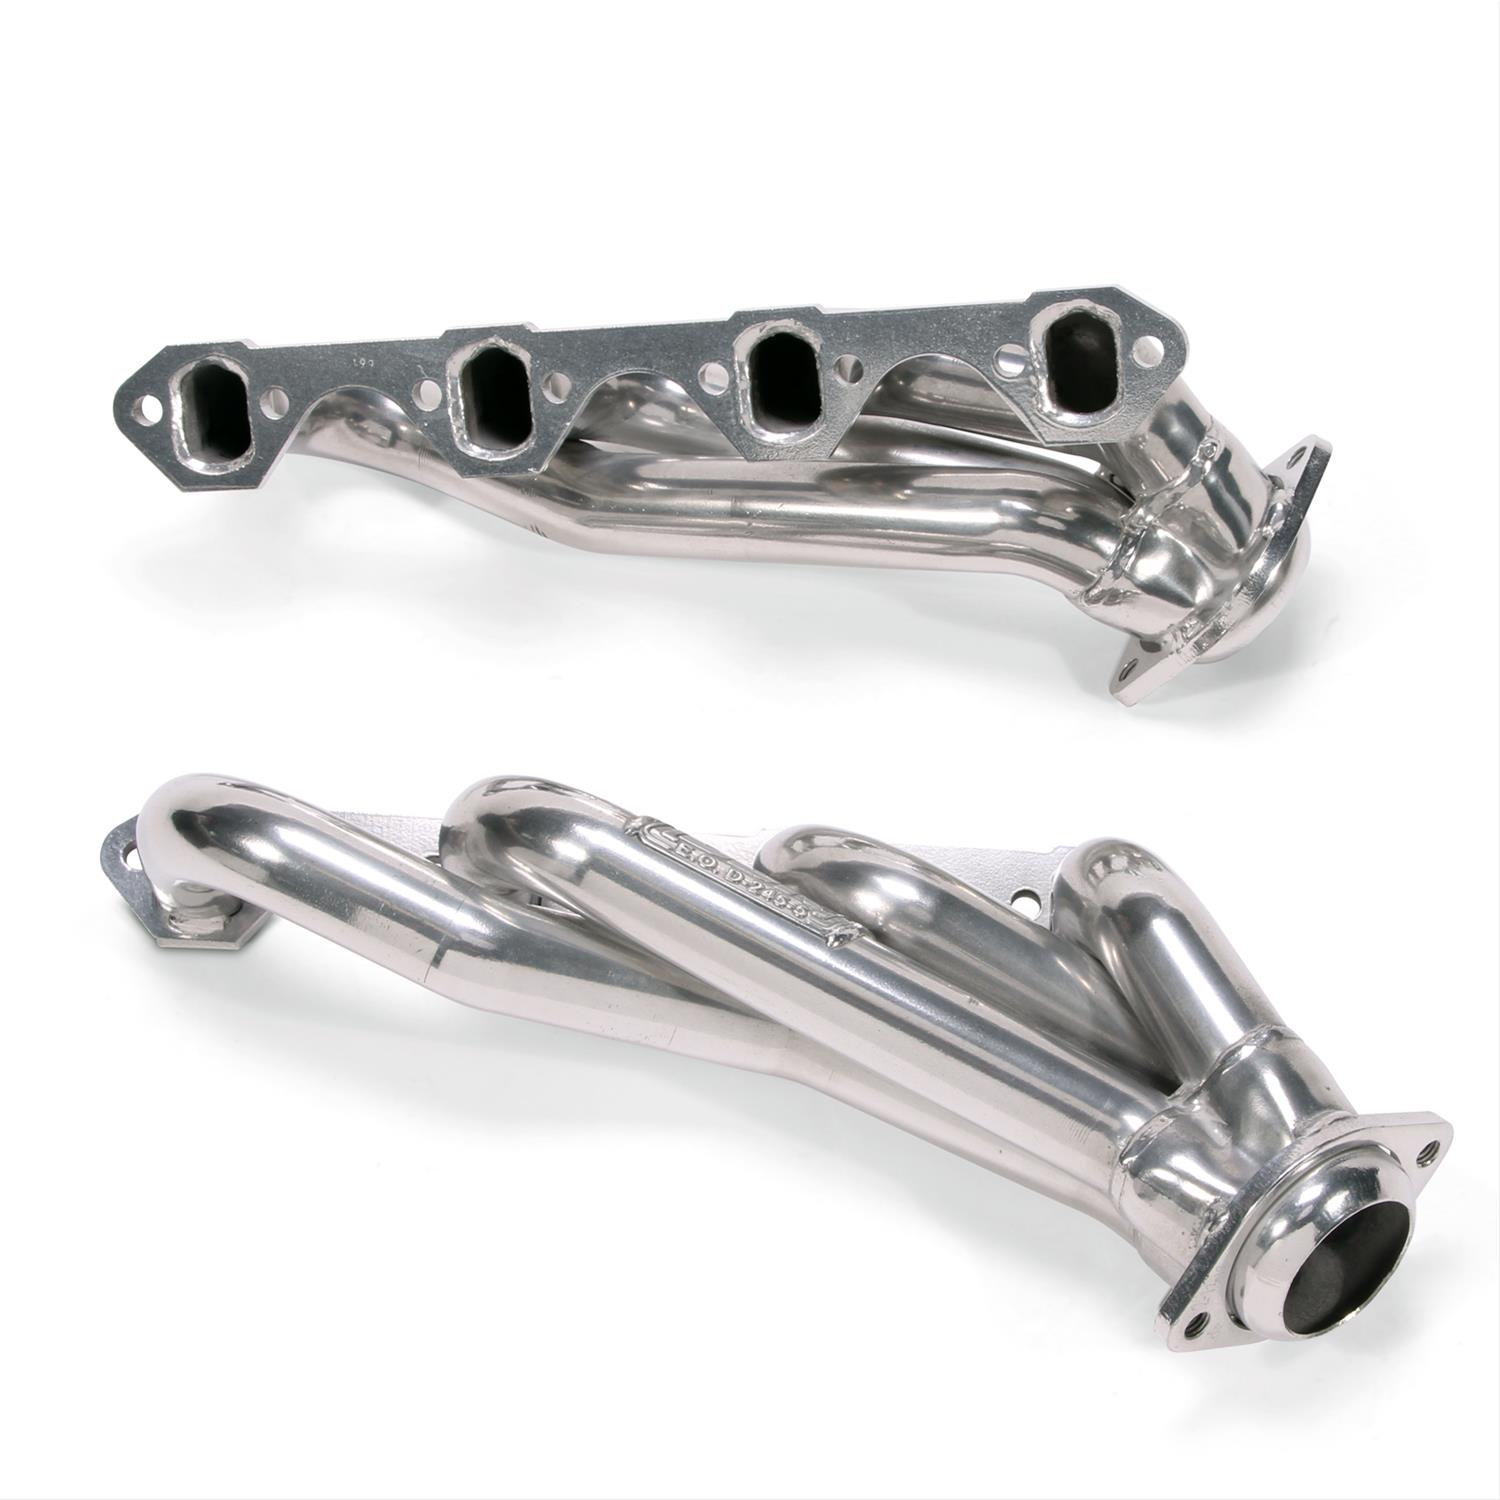 Ford racing ceramic coated shorty headers #2